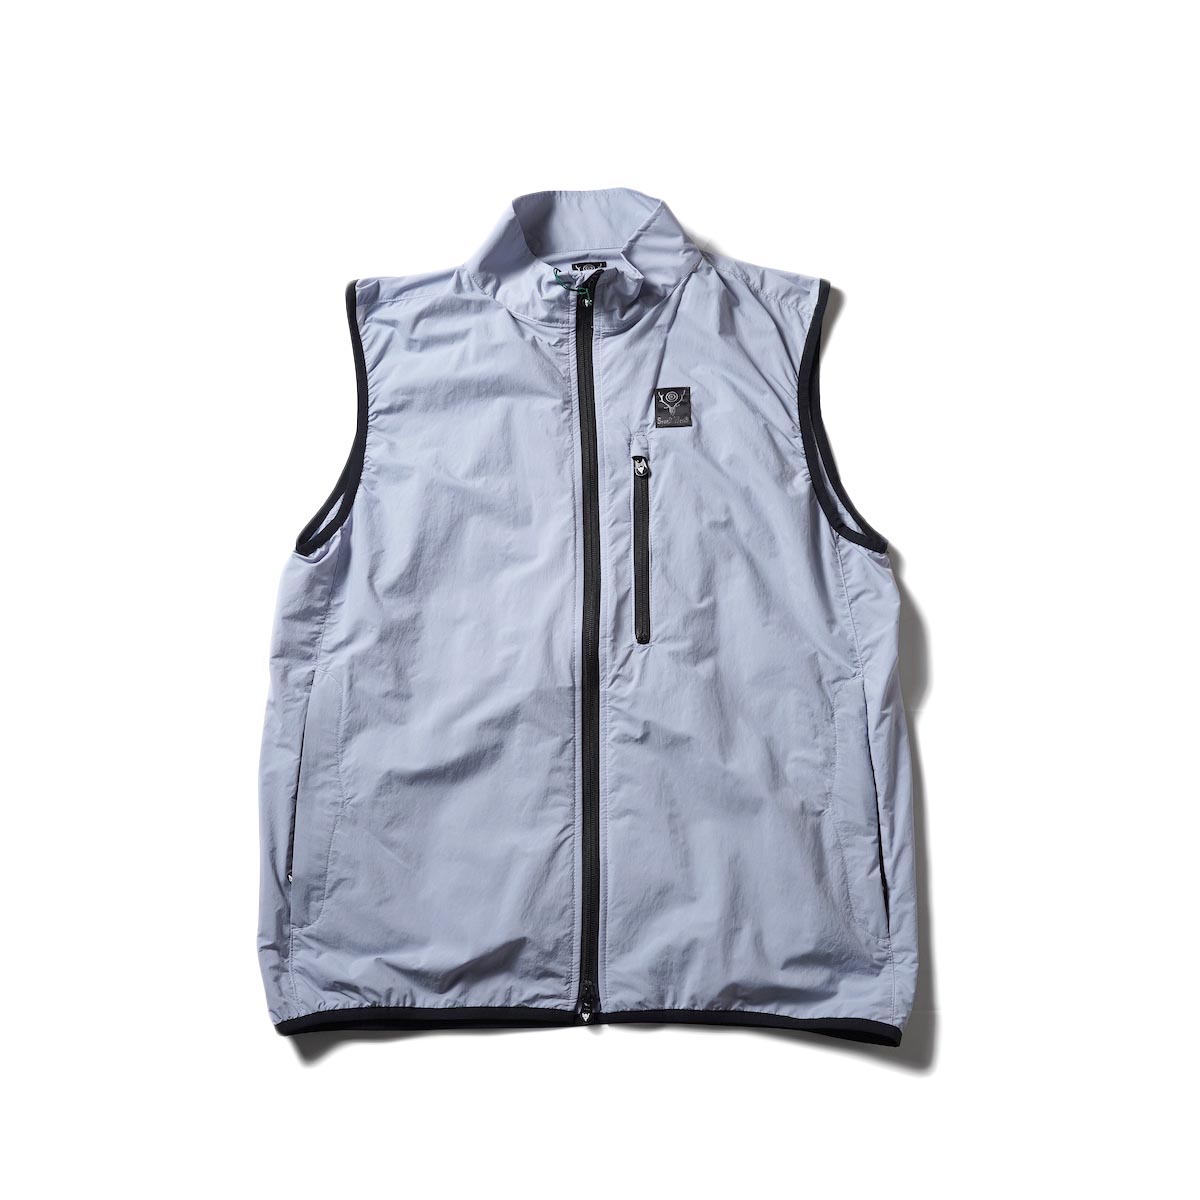 South2 West8 / PACKABLE VEST - NYLON TYPEWRITER (Sax)